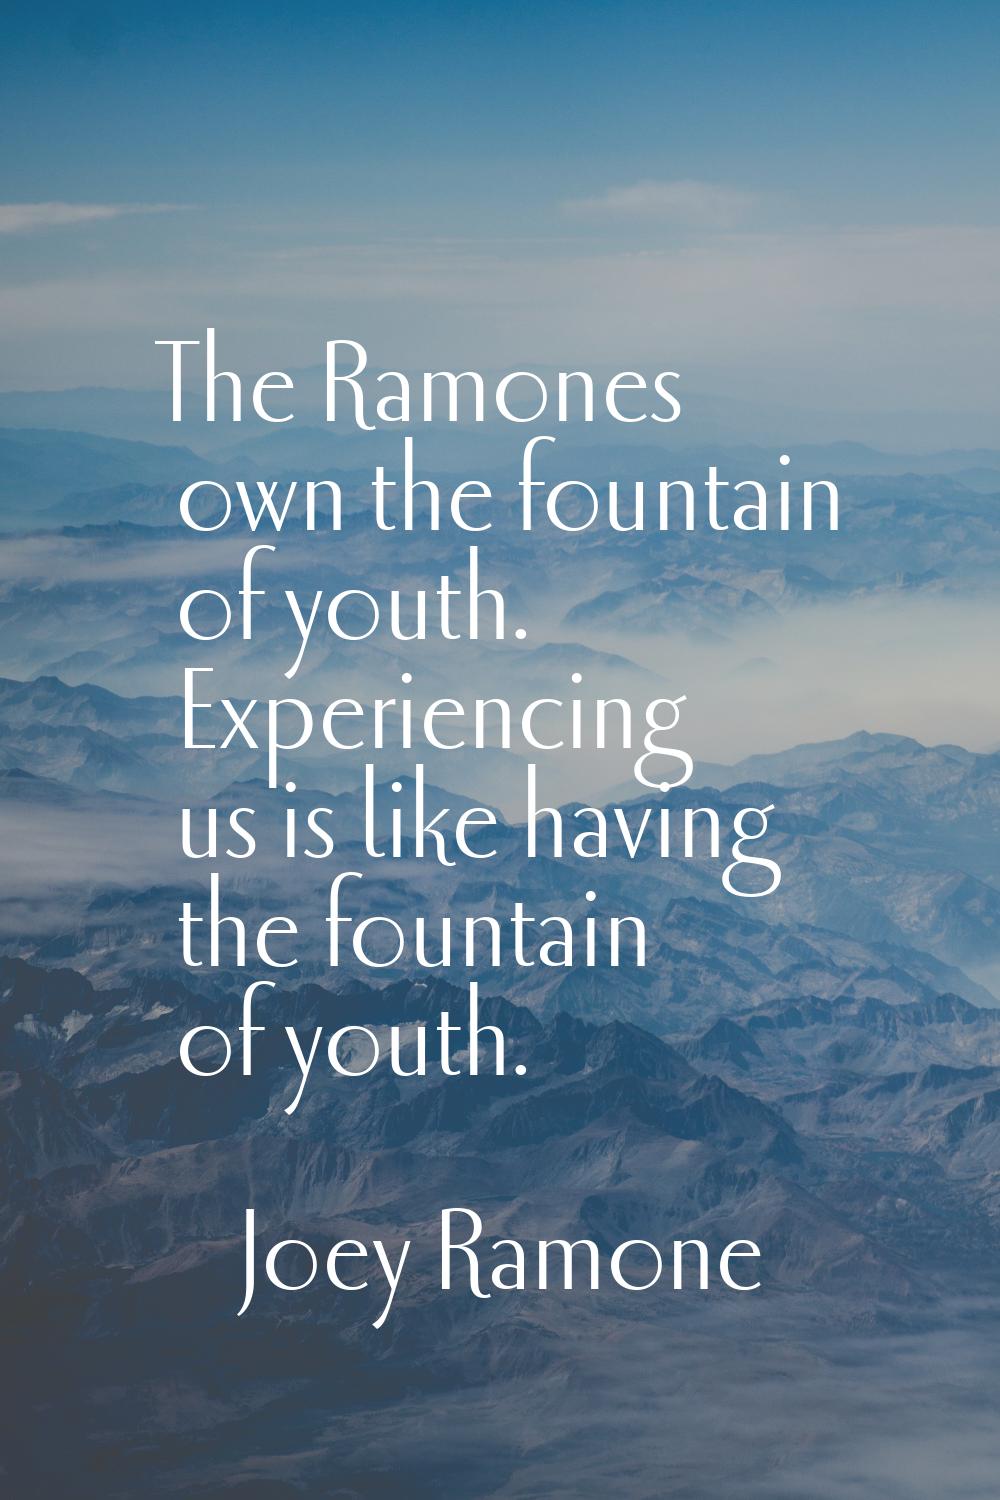 The Ramones own the fountain of youth. Experiencing us is like having the fountain of youth.